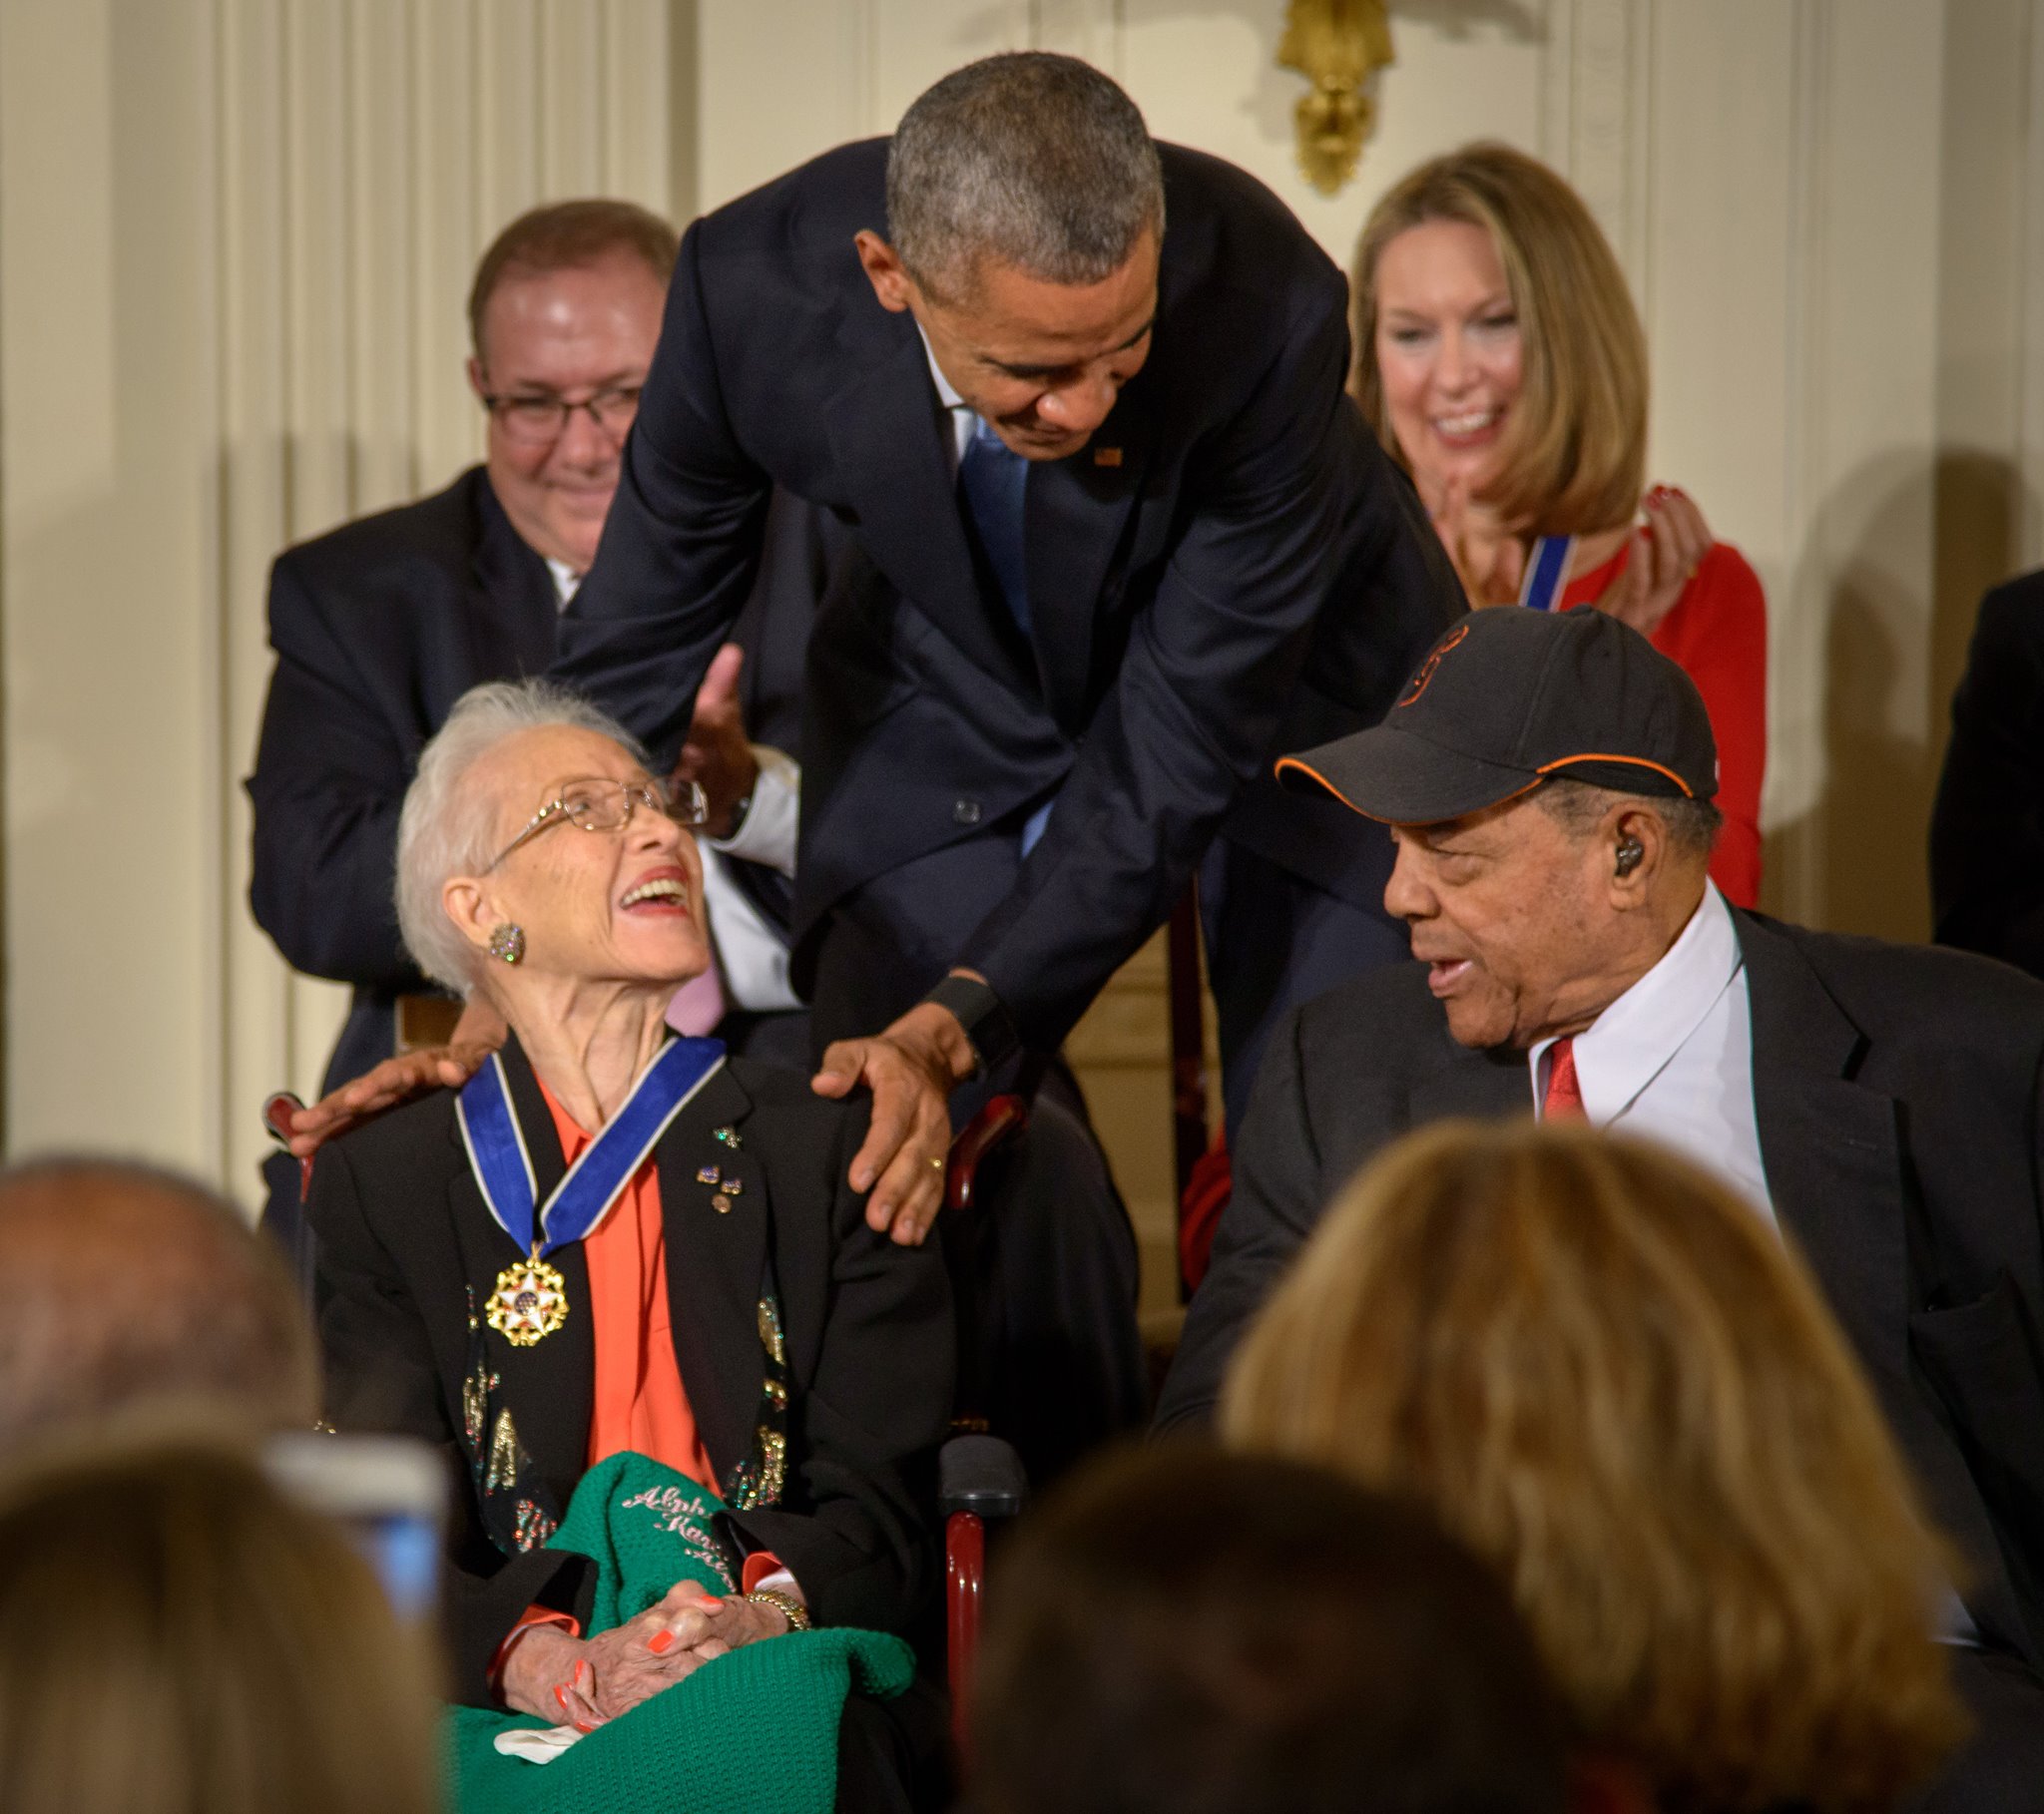 Katharine Johnson smiles at President Barack Obama shortly after receiving the Presidential Medal of Freedom. Photo Credit: NASA/Bill Ingalls